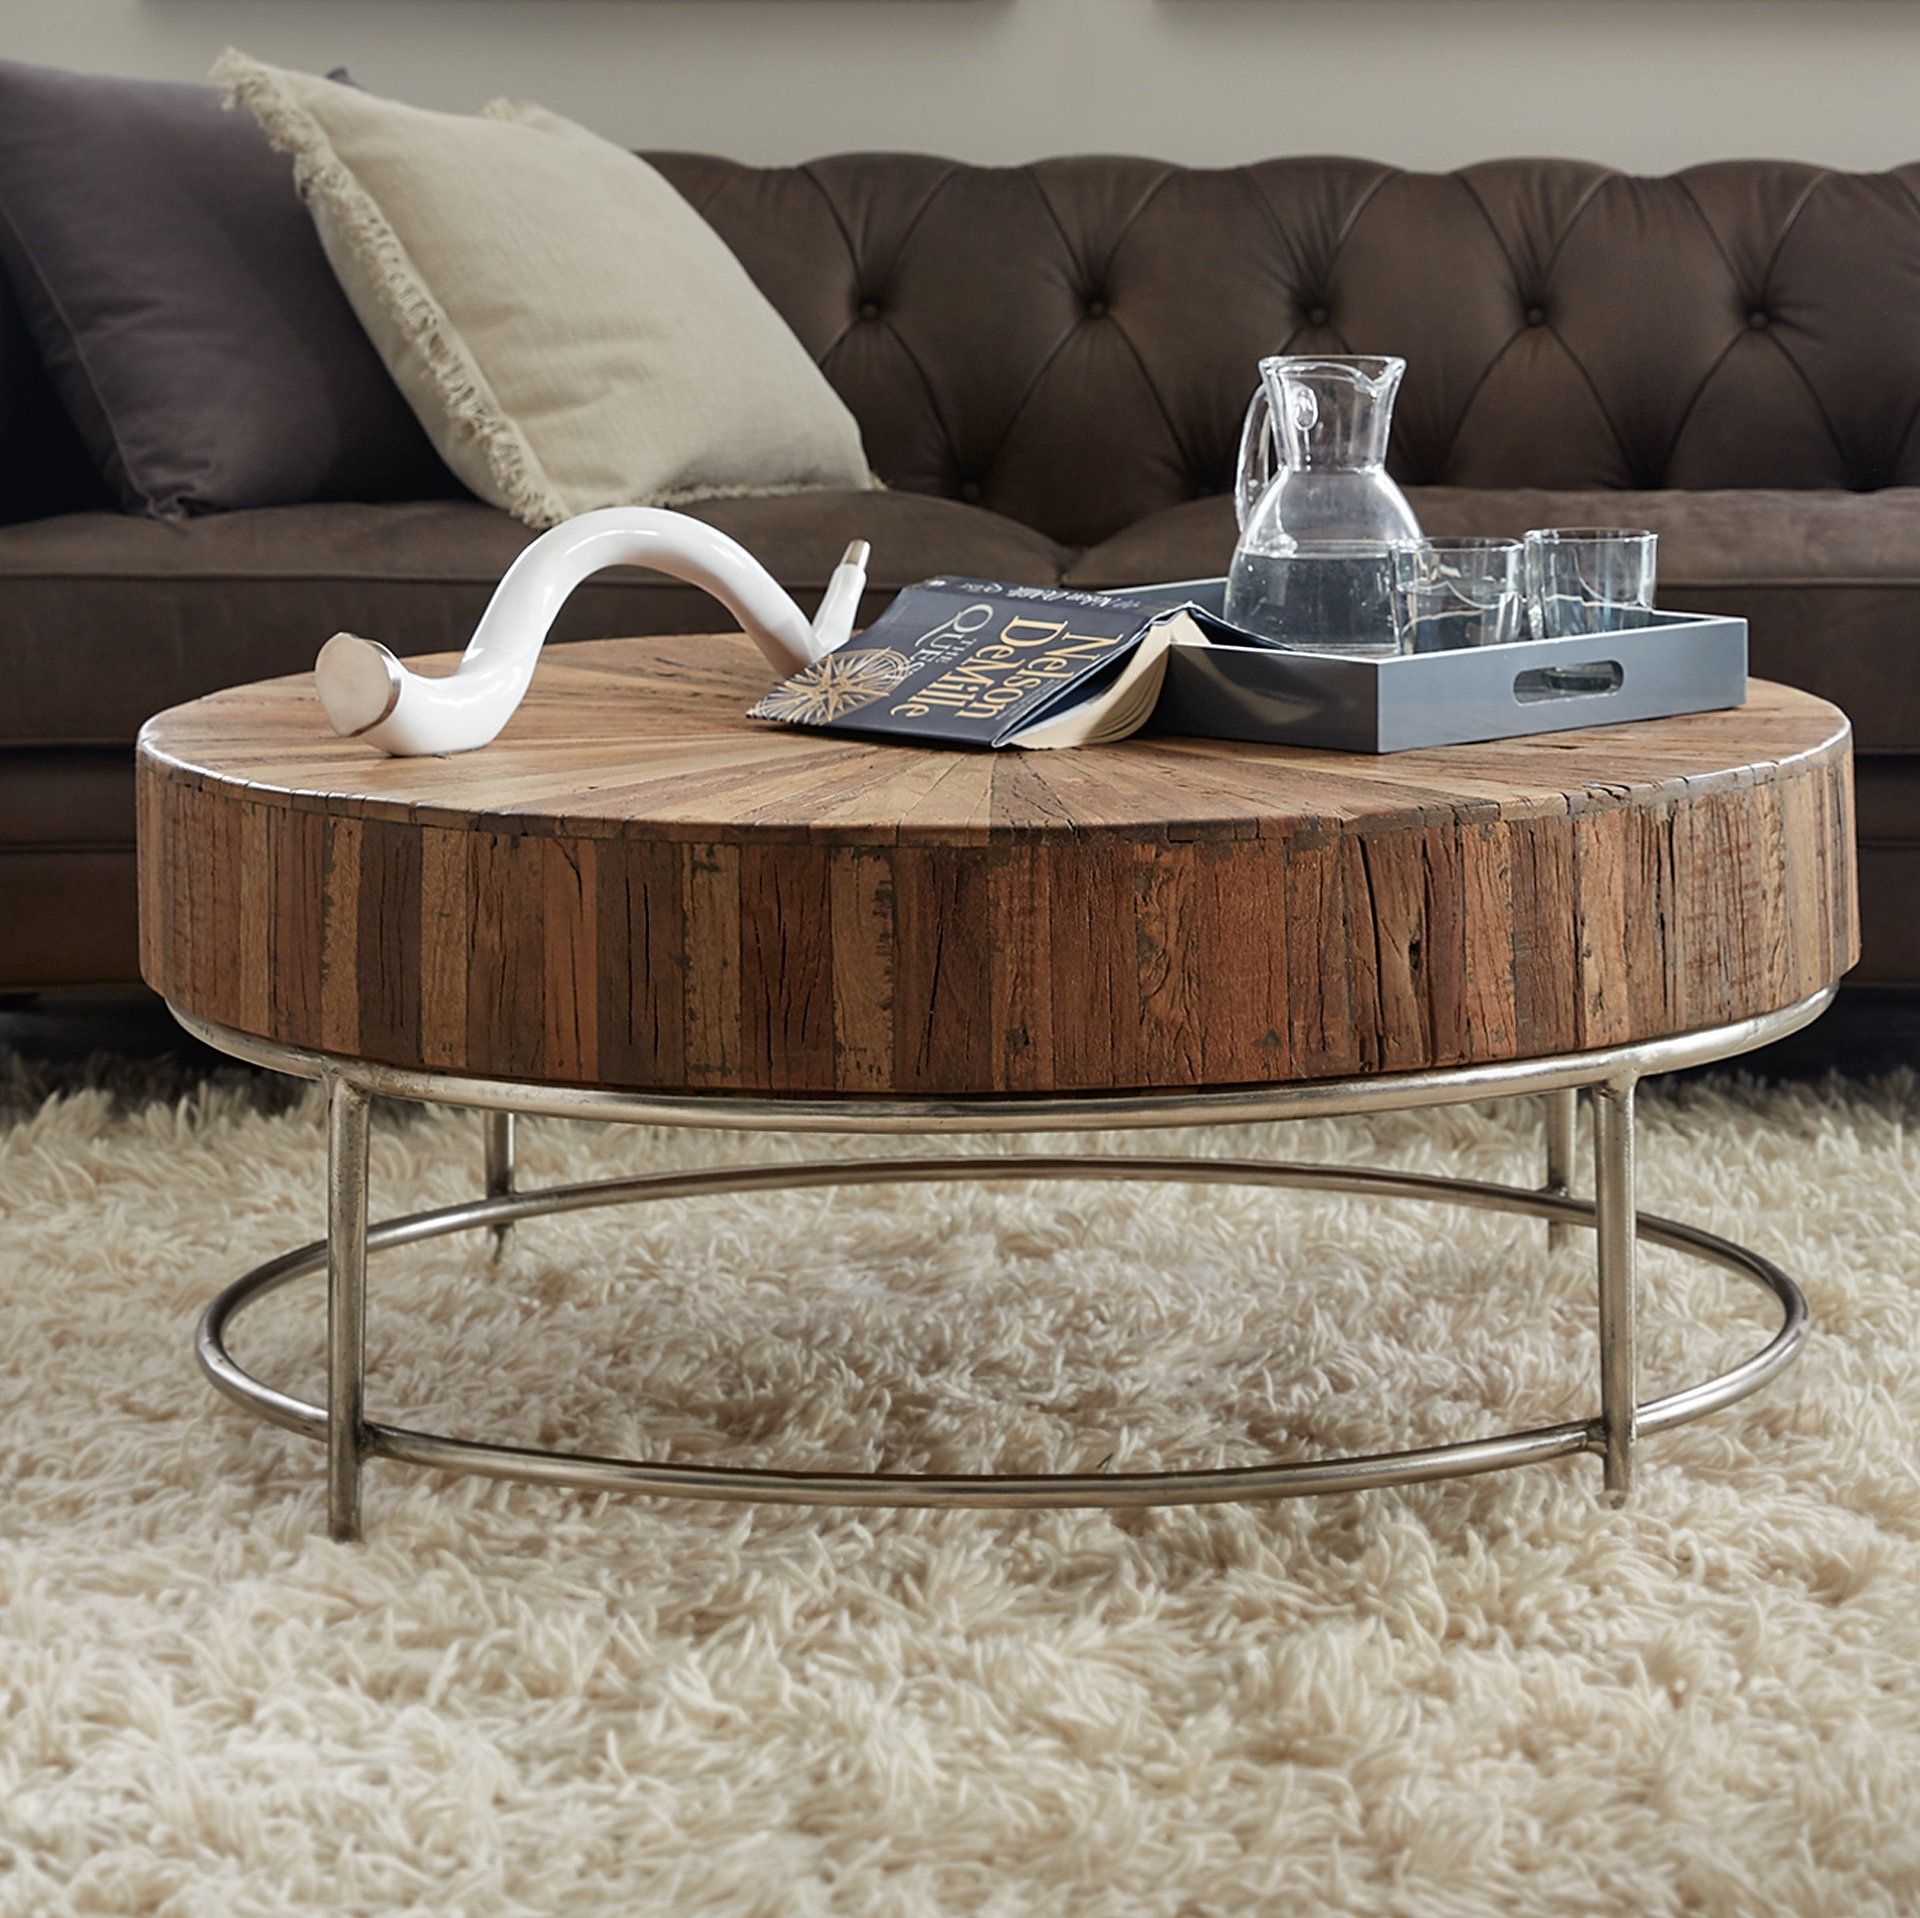 Hooker Furniture L'usine Coffee Table | Wayfair Within Stack Hi Gloss Wood Coffee Tables (View 6 of 30)